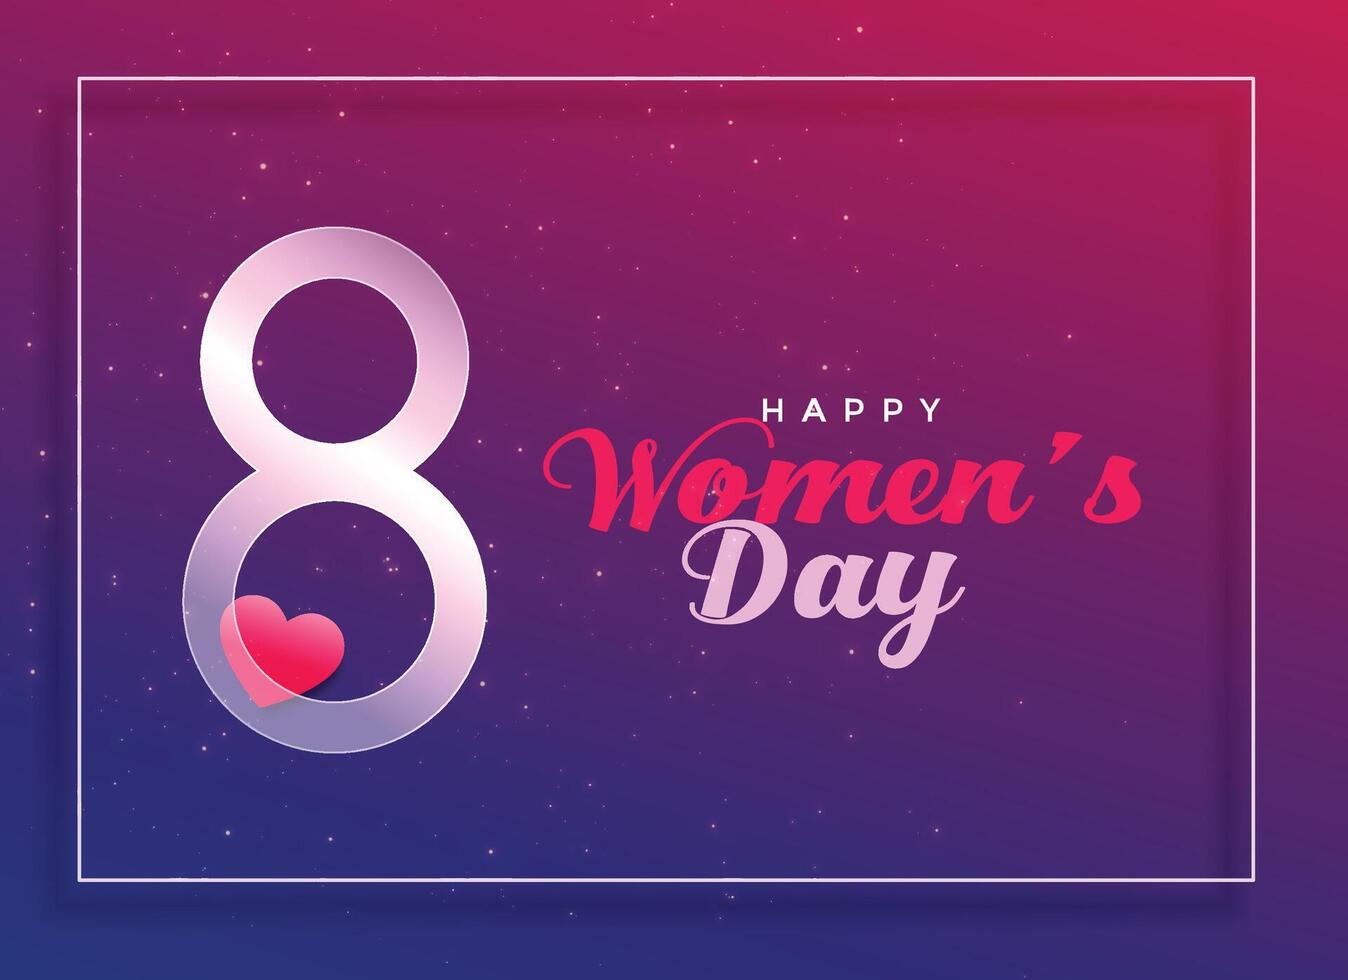 8th March, international women's day celebration background vector